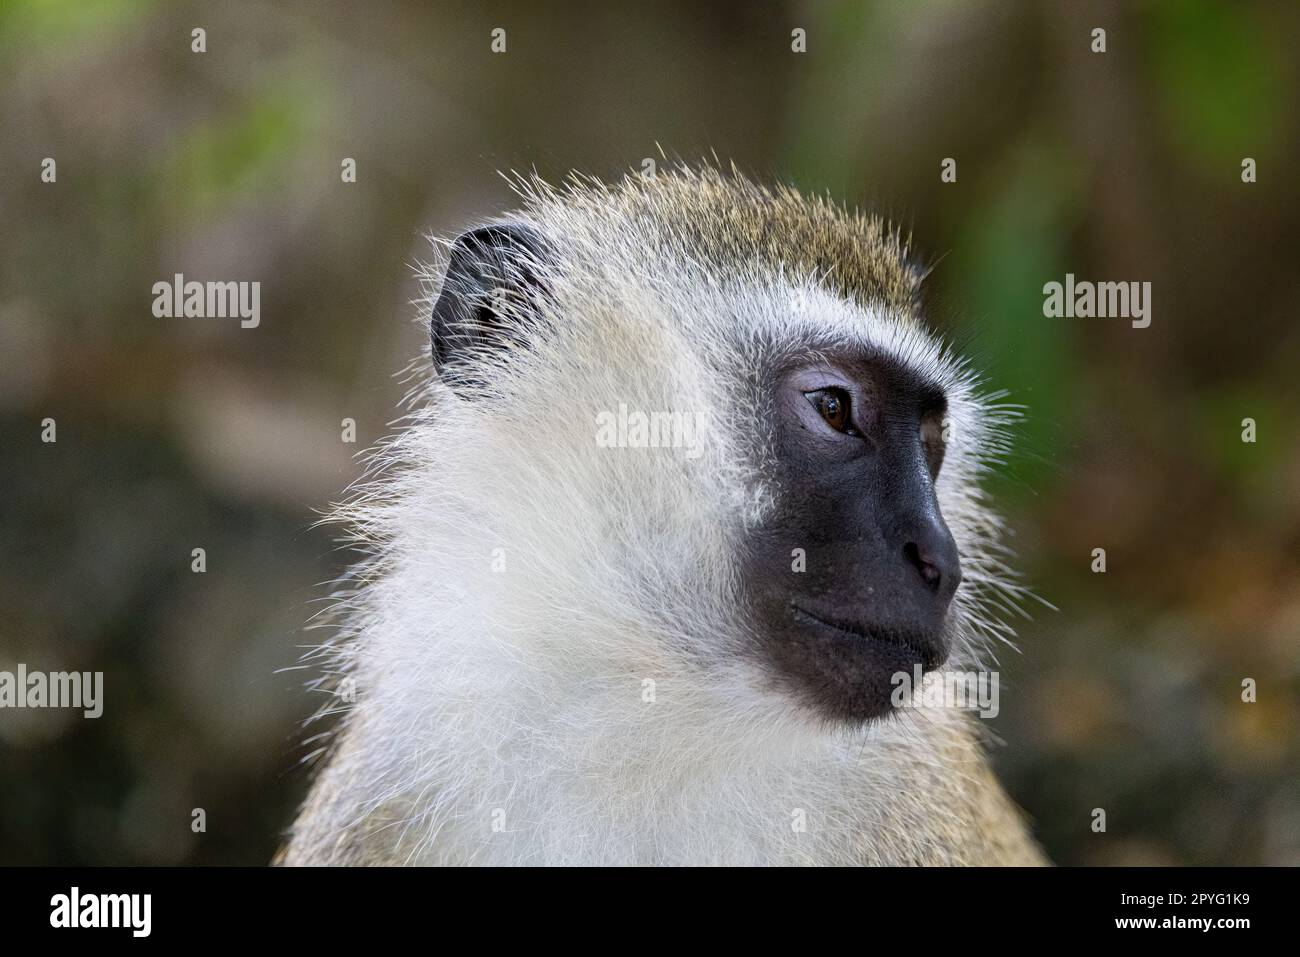 A close-up photo of a Vervet Monkey's face, capturing its expressive features and stunning fur patterns Stock Photo